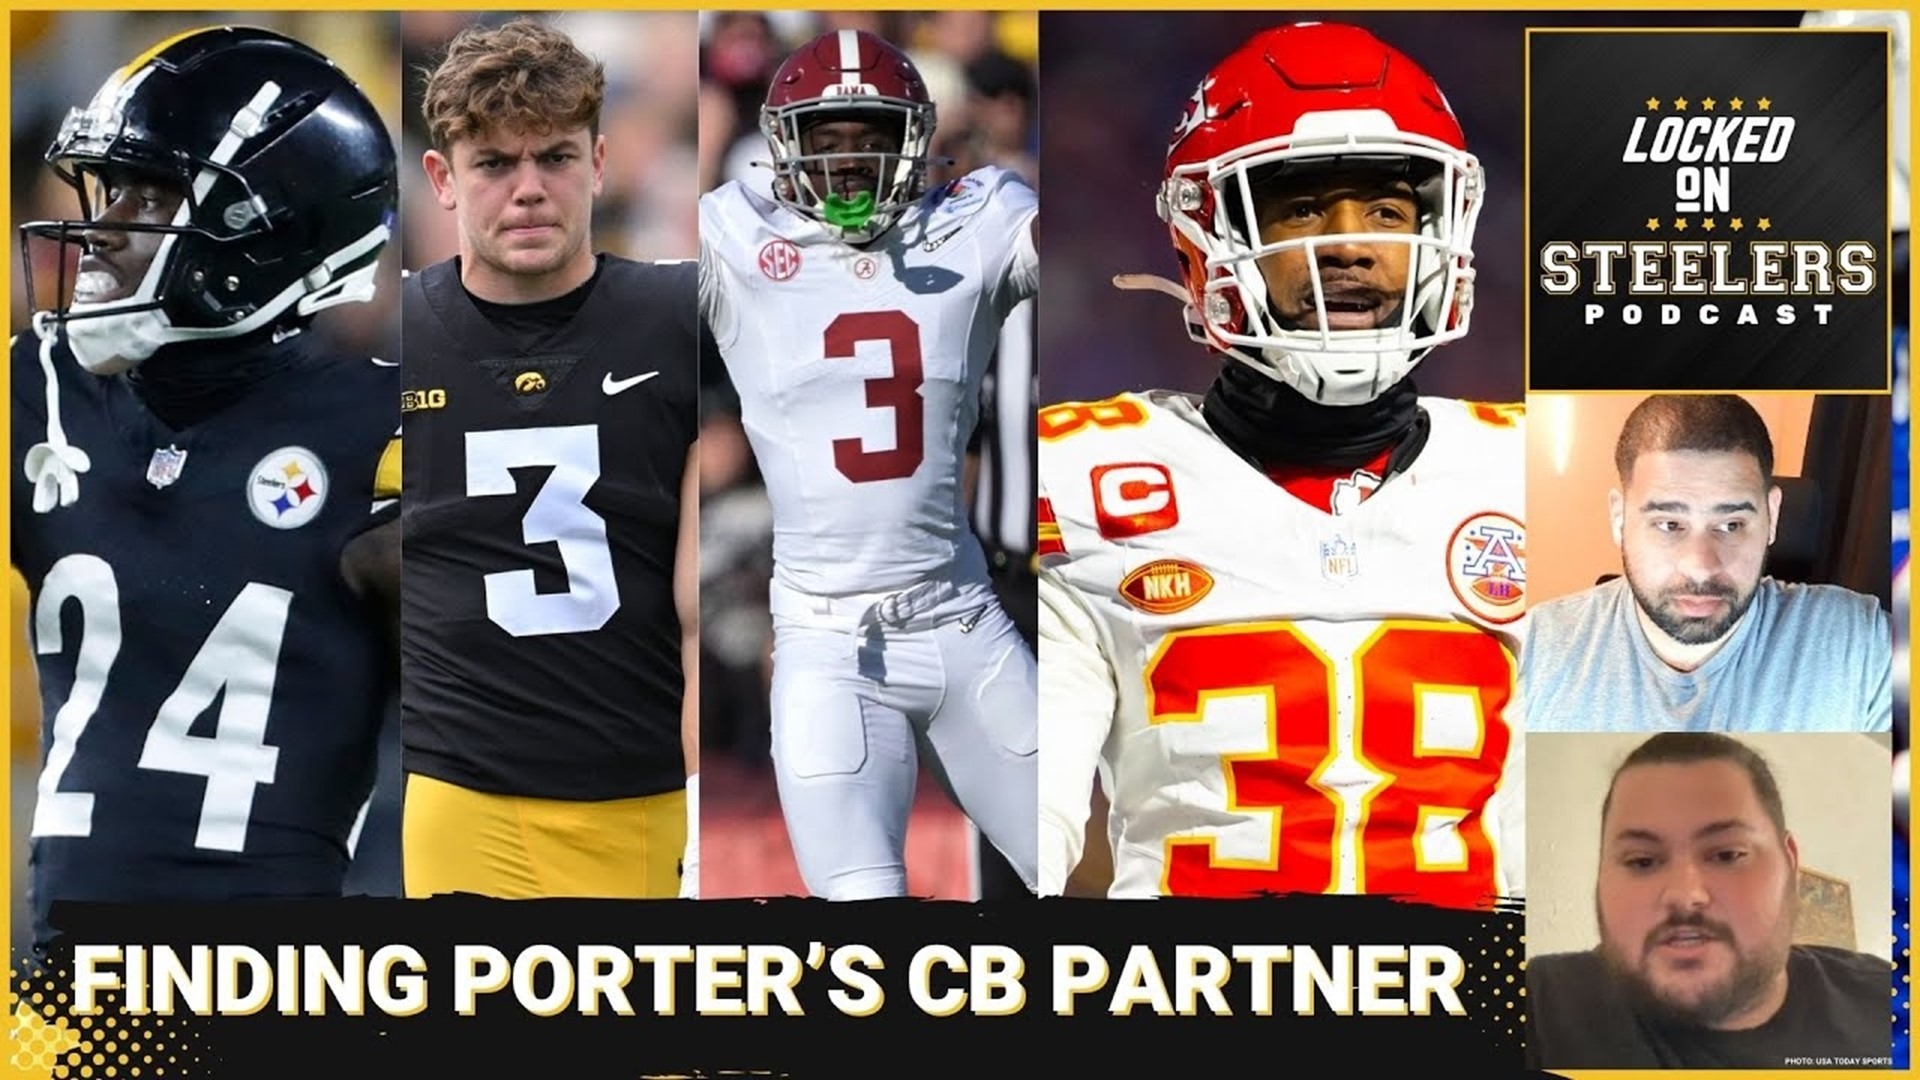 The Pittsburgh Steelers need to find their next top cornerback to pair with Joey Porter Jr. for the future. Are the best options in the NFL Draft, or in free agency?